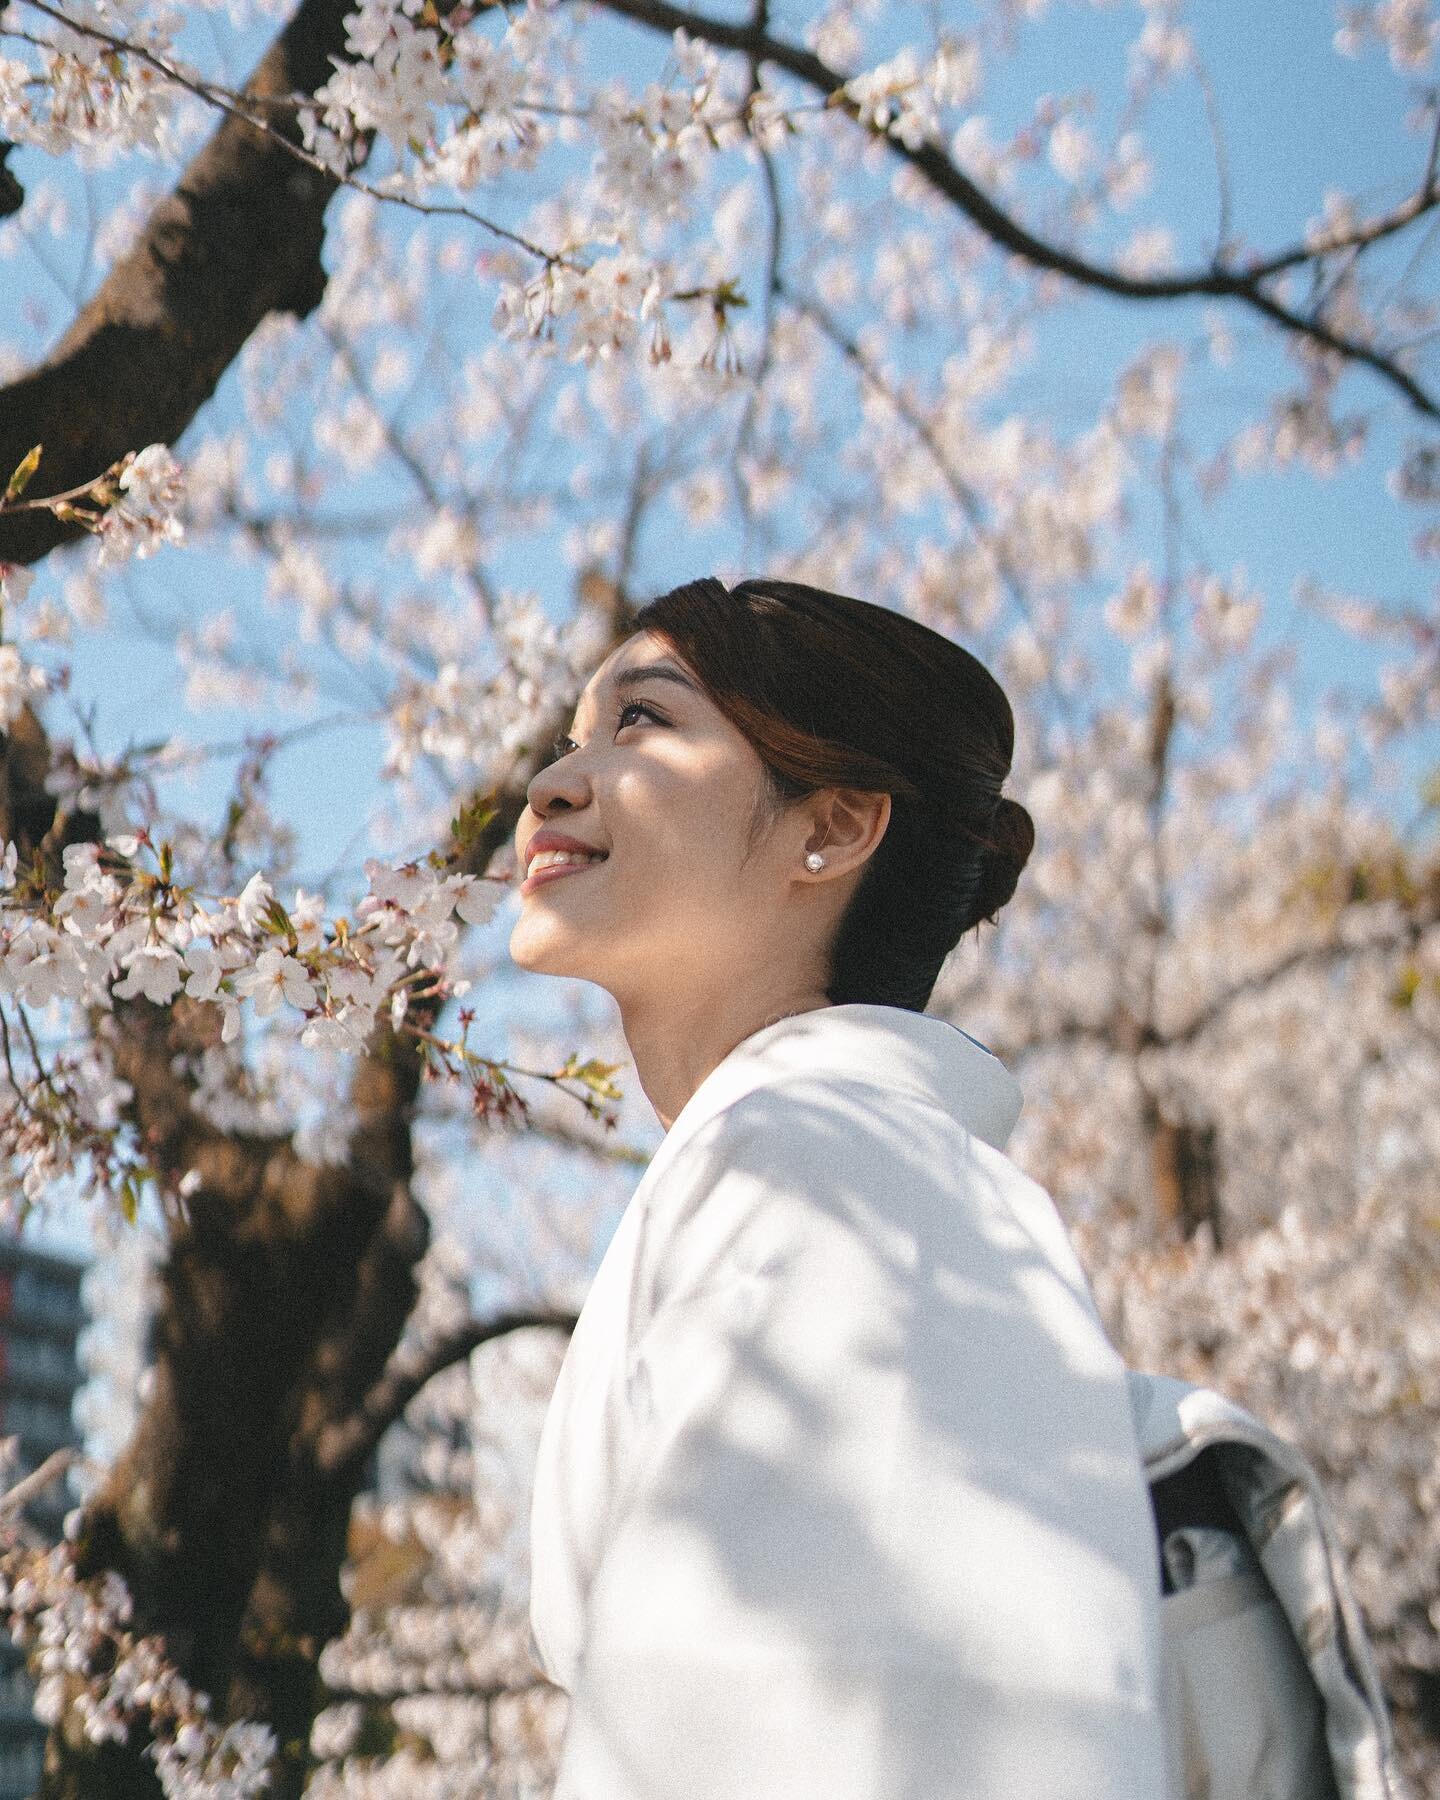 Connecting with people from all kinds of backgrounds is the best part of my job. Thank you, J, for letting me capture your moments in Tokyo!

#tokyophotographer #tokyophotoshoot #tokyoportrait #sumidapark #cherryblossom